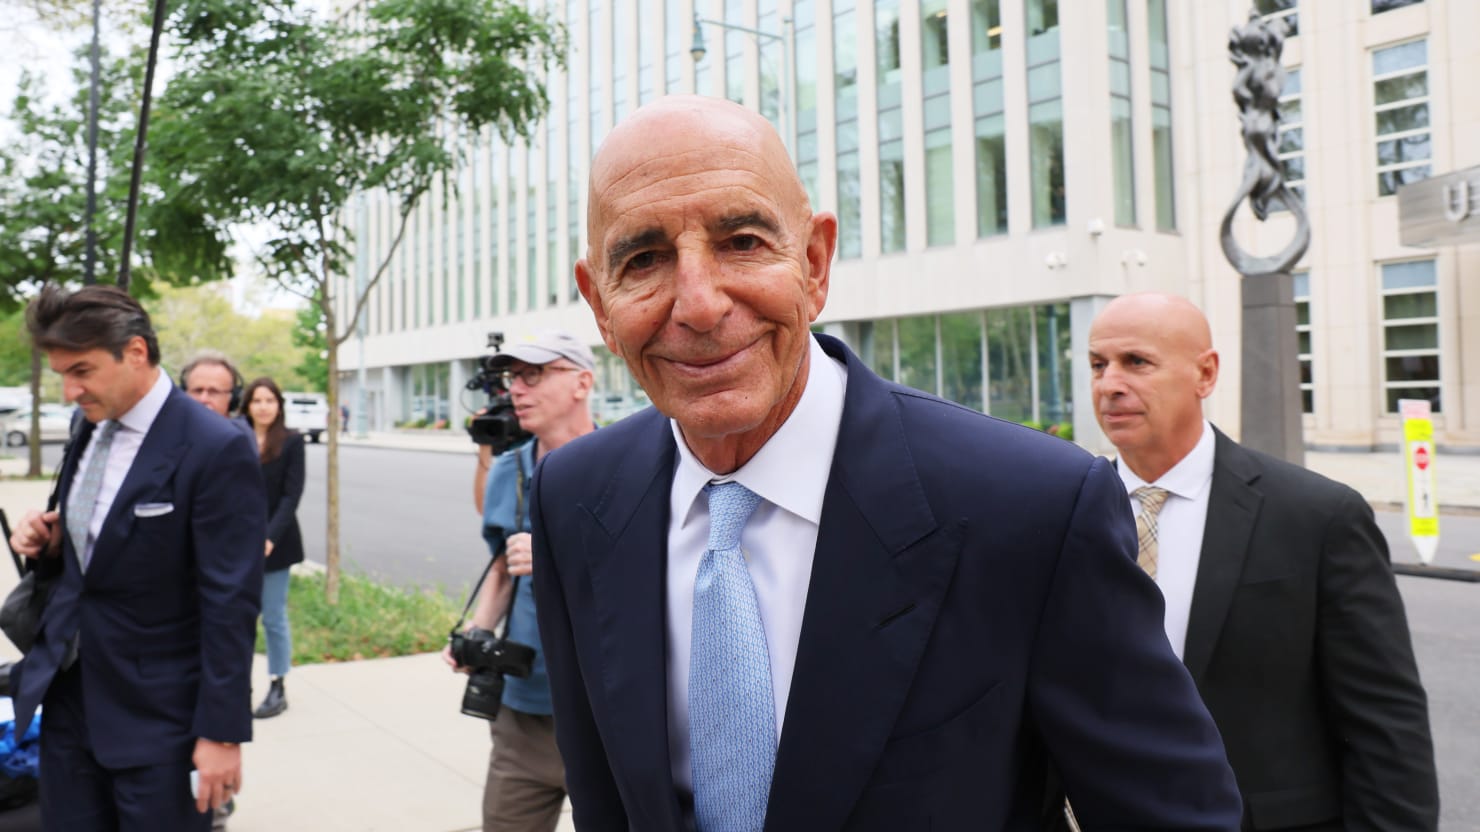 Trump’s Billionaire Pal Tom Barrack Found Not Guilty on Foreign Lobbying Charges